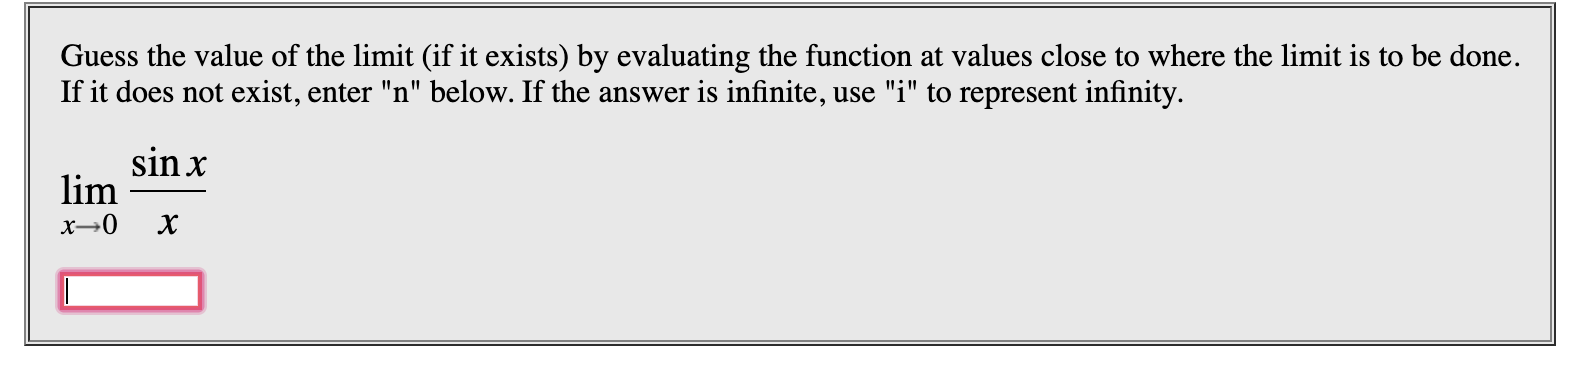 Guess the value of the limit (if it exists) by evaluating the function at values close to where the limit is to be done.
If it does not exist, enter "n" below. If the answer is infinite, use "i" to represent infinity
sin x
lim
x-0
